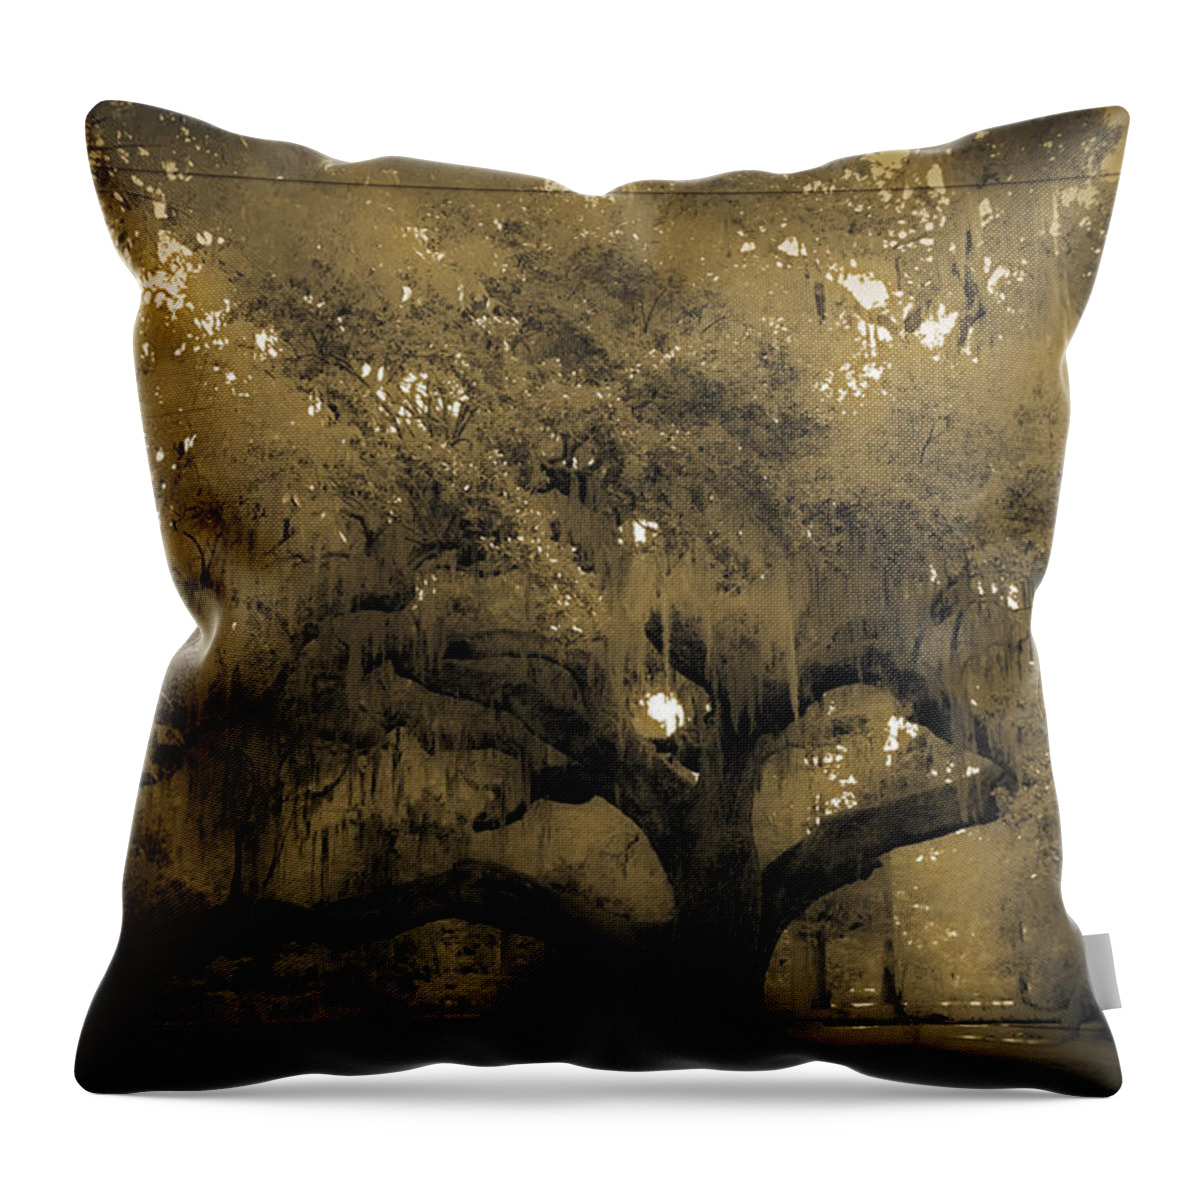 Live Oak Throw Pillow featuring the photograph Centurion Oak by DigiArt Diaries by Vicky B Fuller